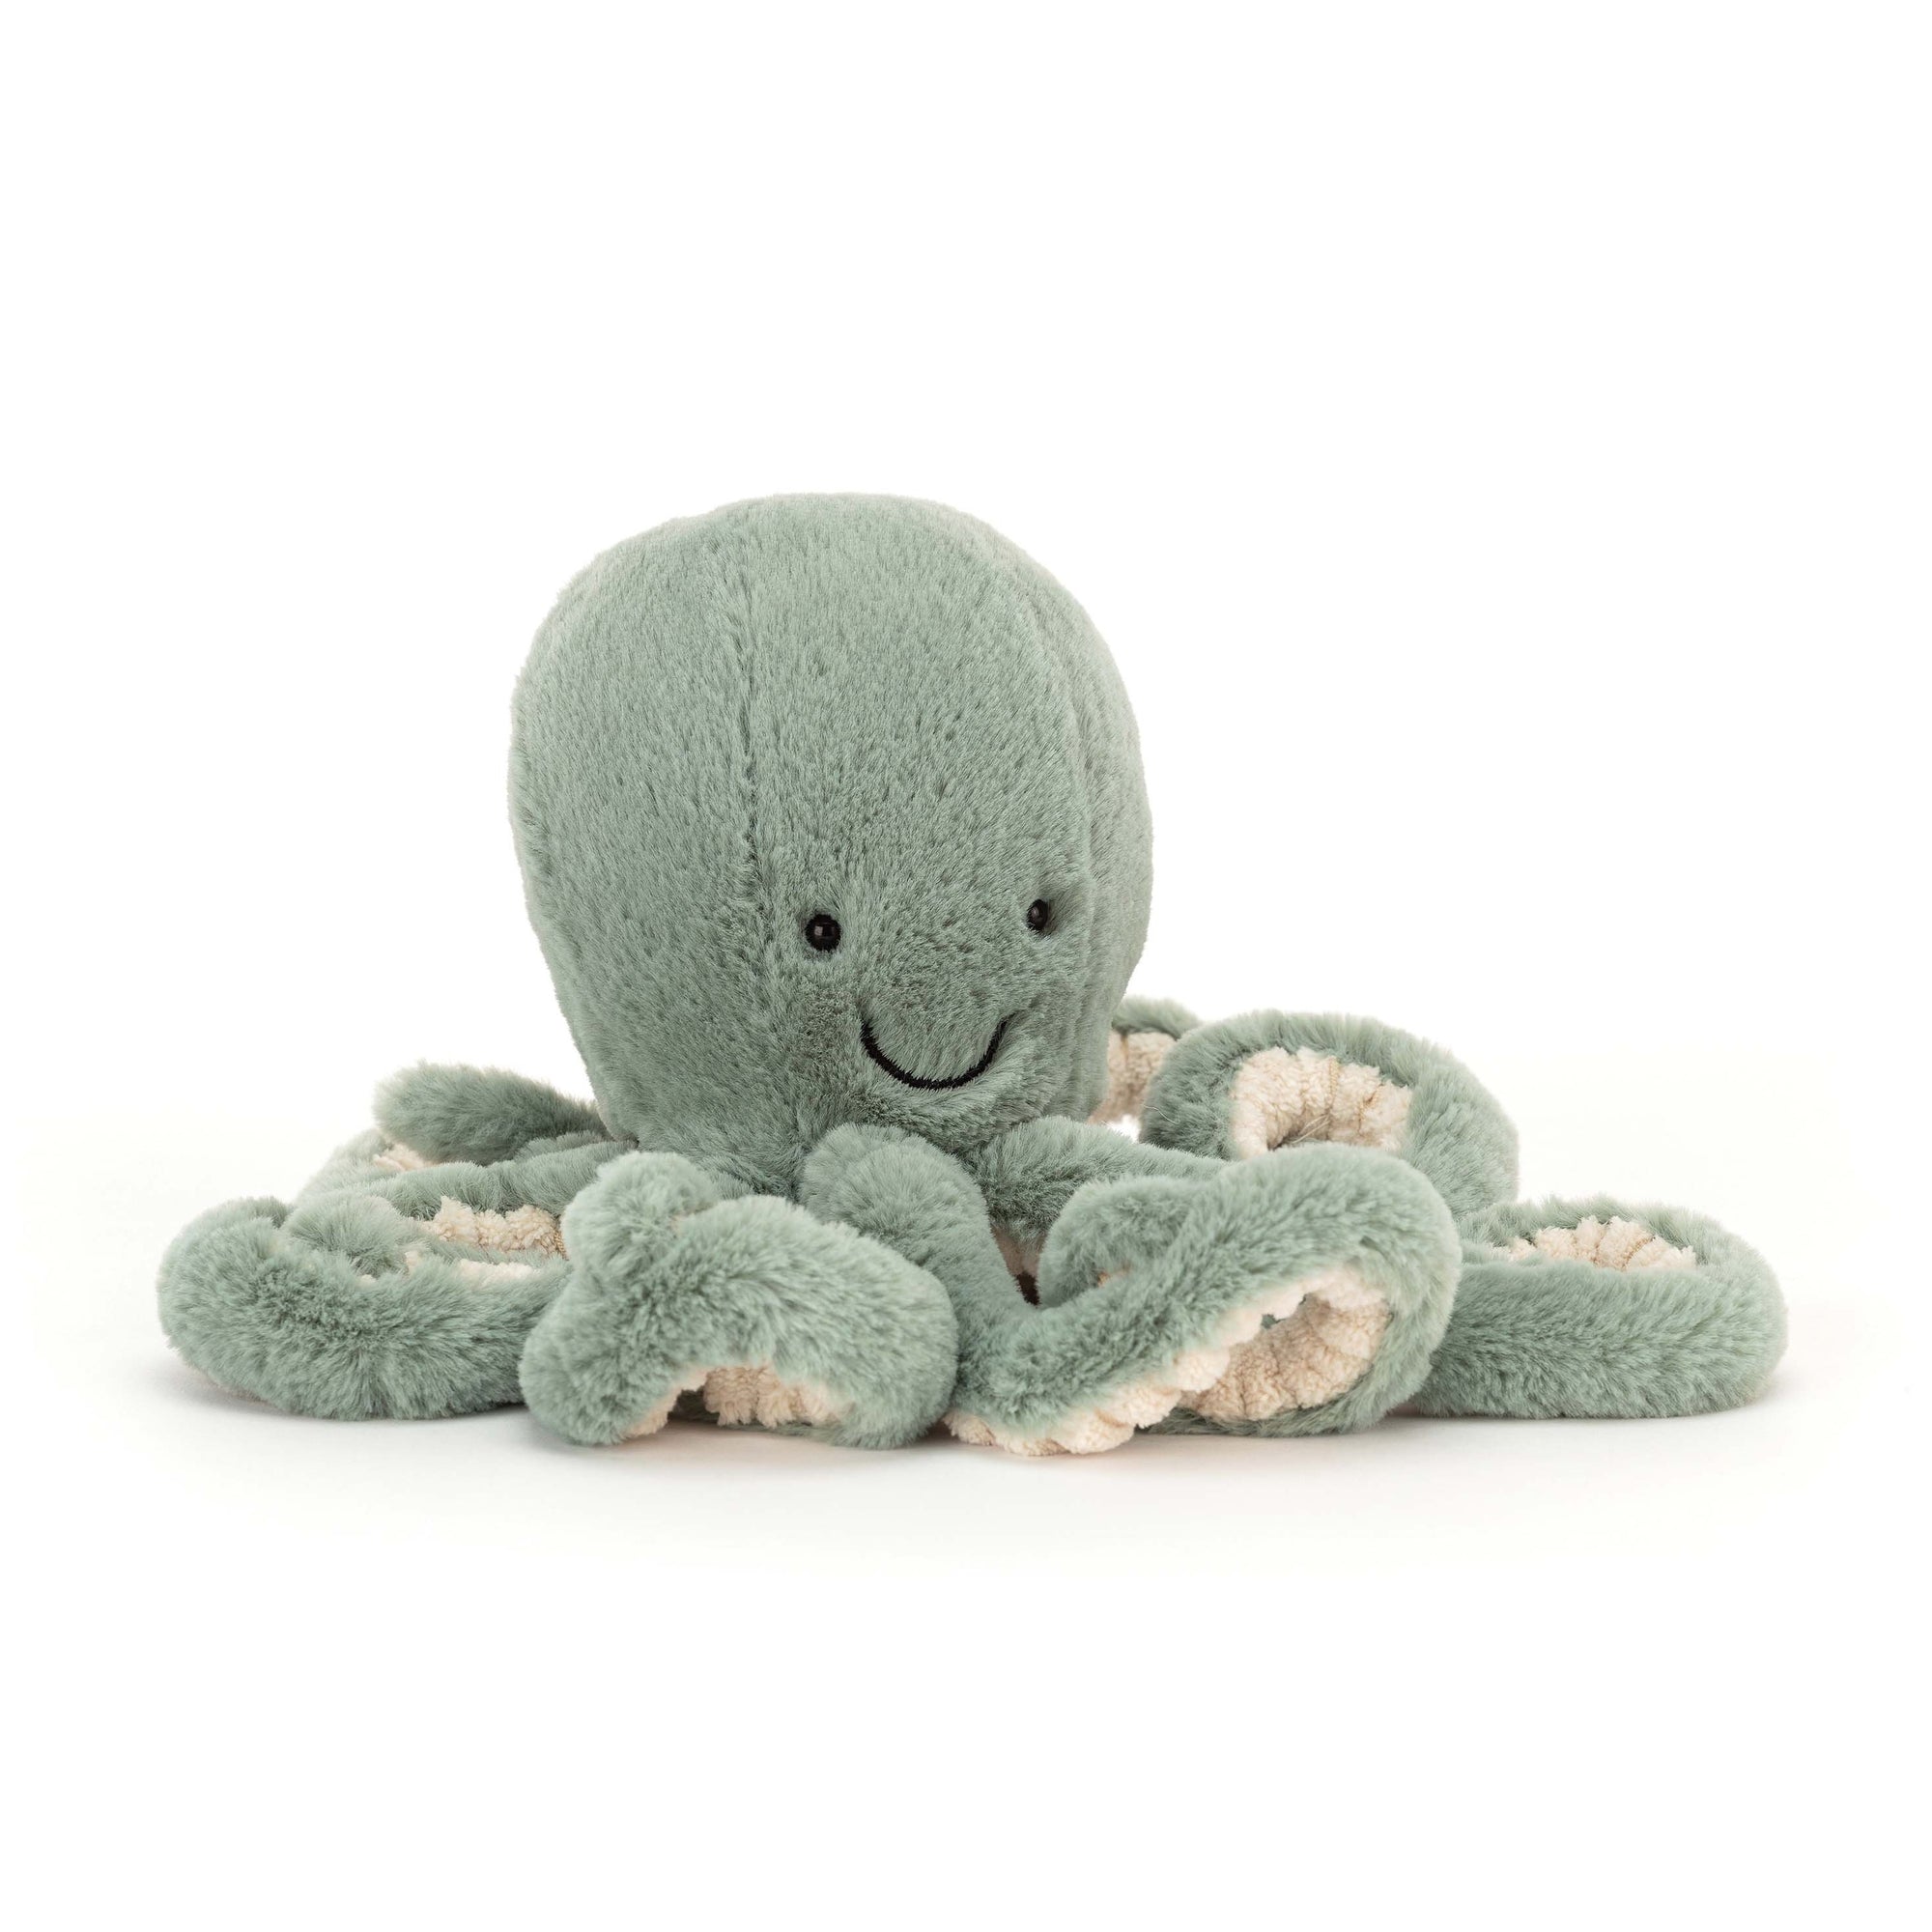 jellycat octopus - angus and dudley